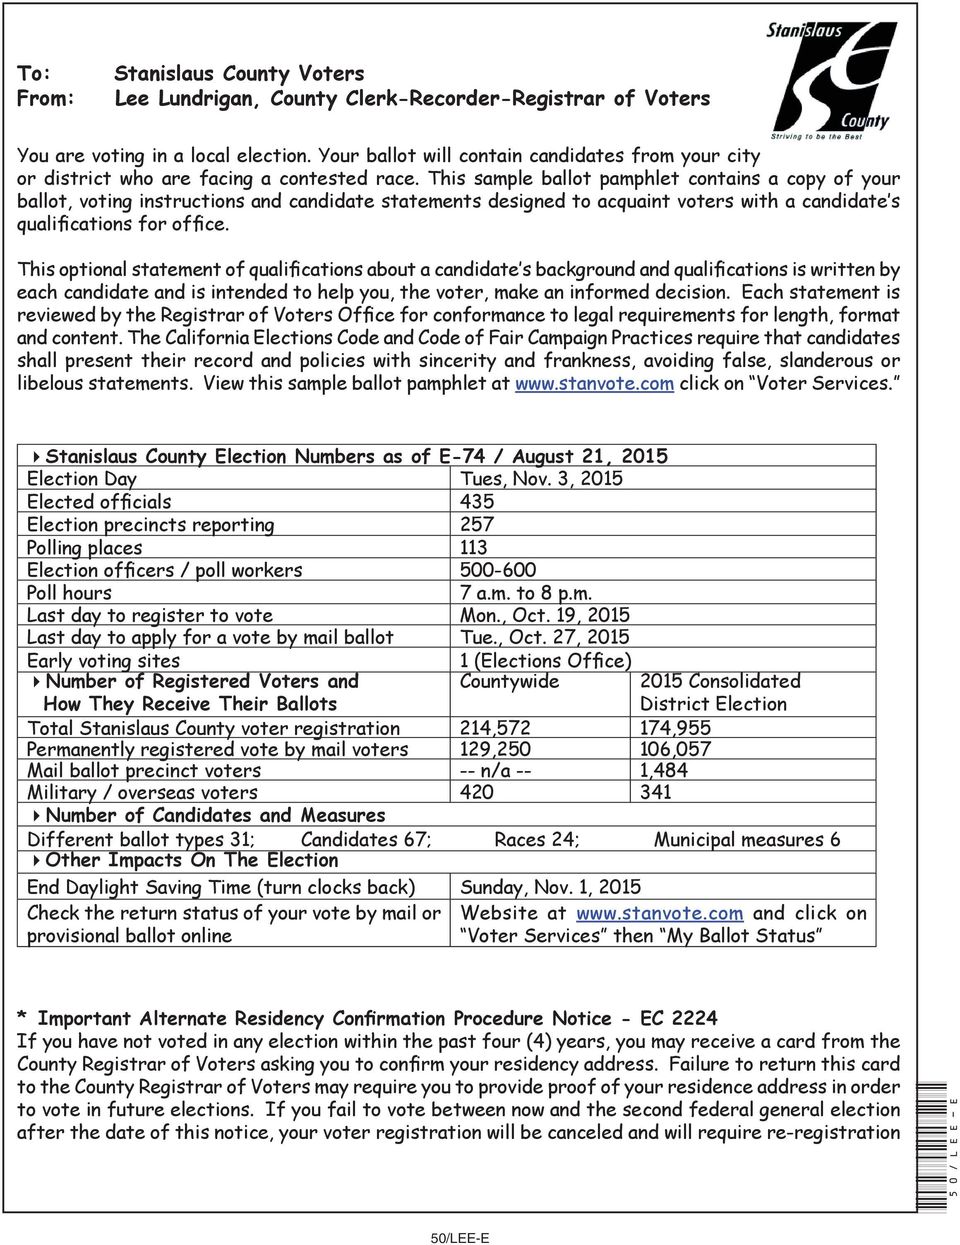 This sample ballot pamphlet contains a copy of your ballot, voting instructions and candidate statements designed to acquaint voters with a candidate s qualifications for office.